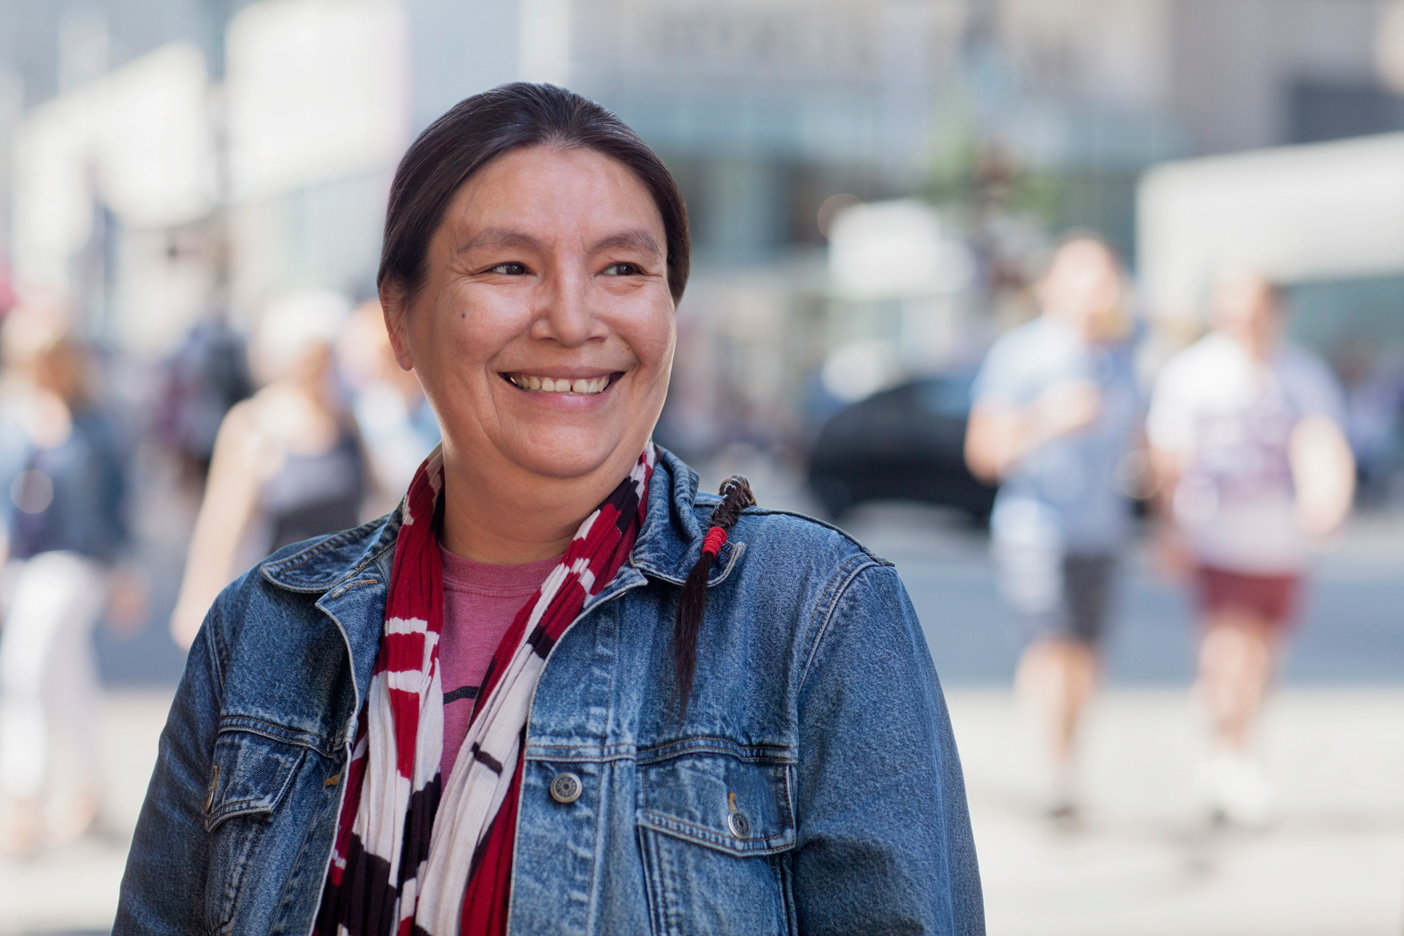 A Native American person smiling while standing in an urban area